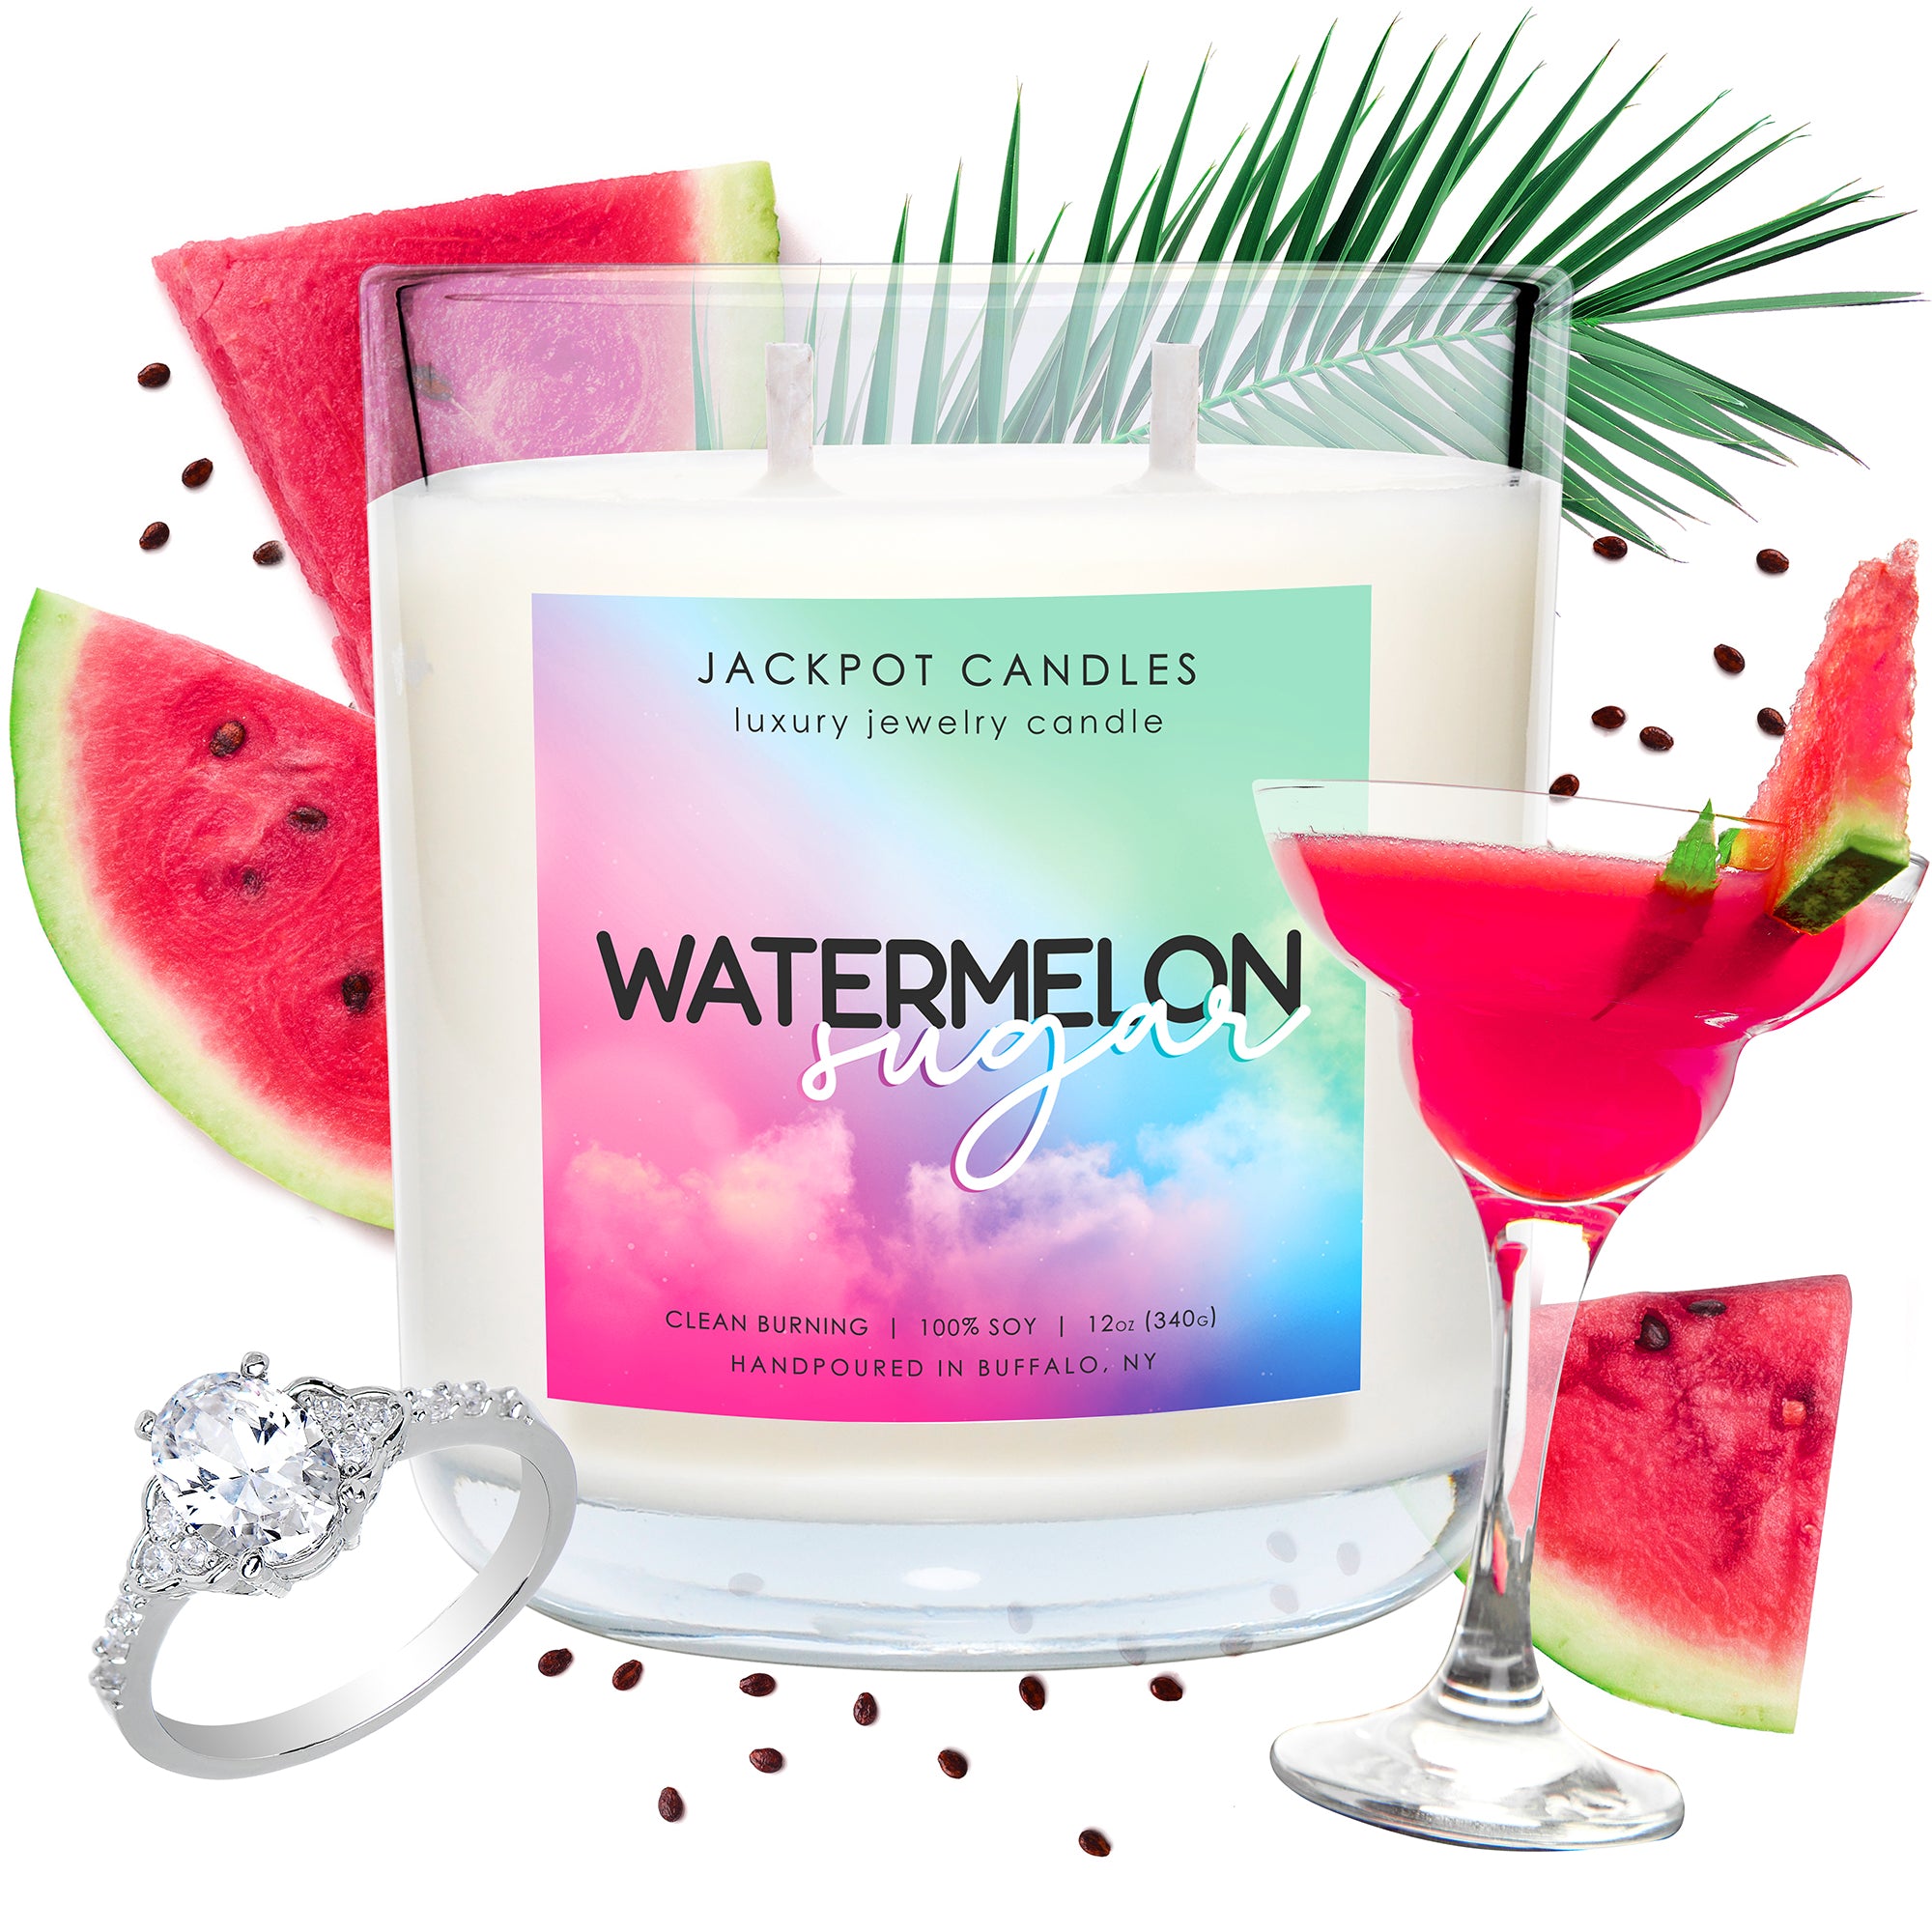 Watermelon Sugar Double Wick Candle